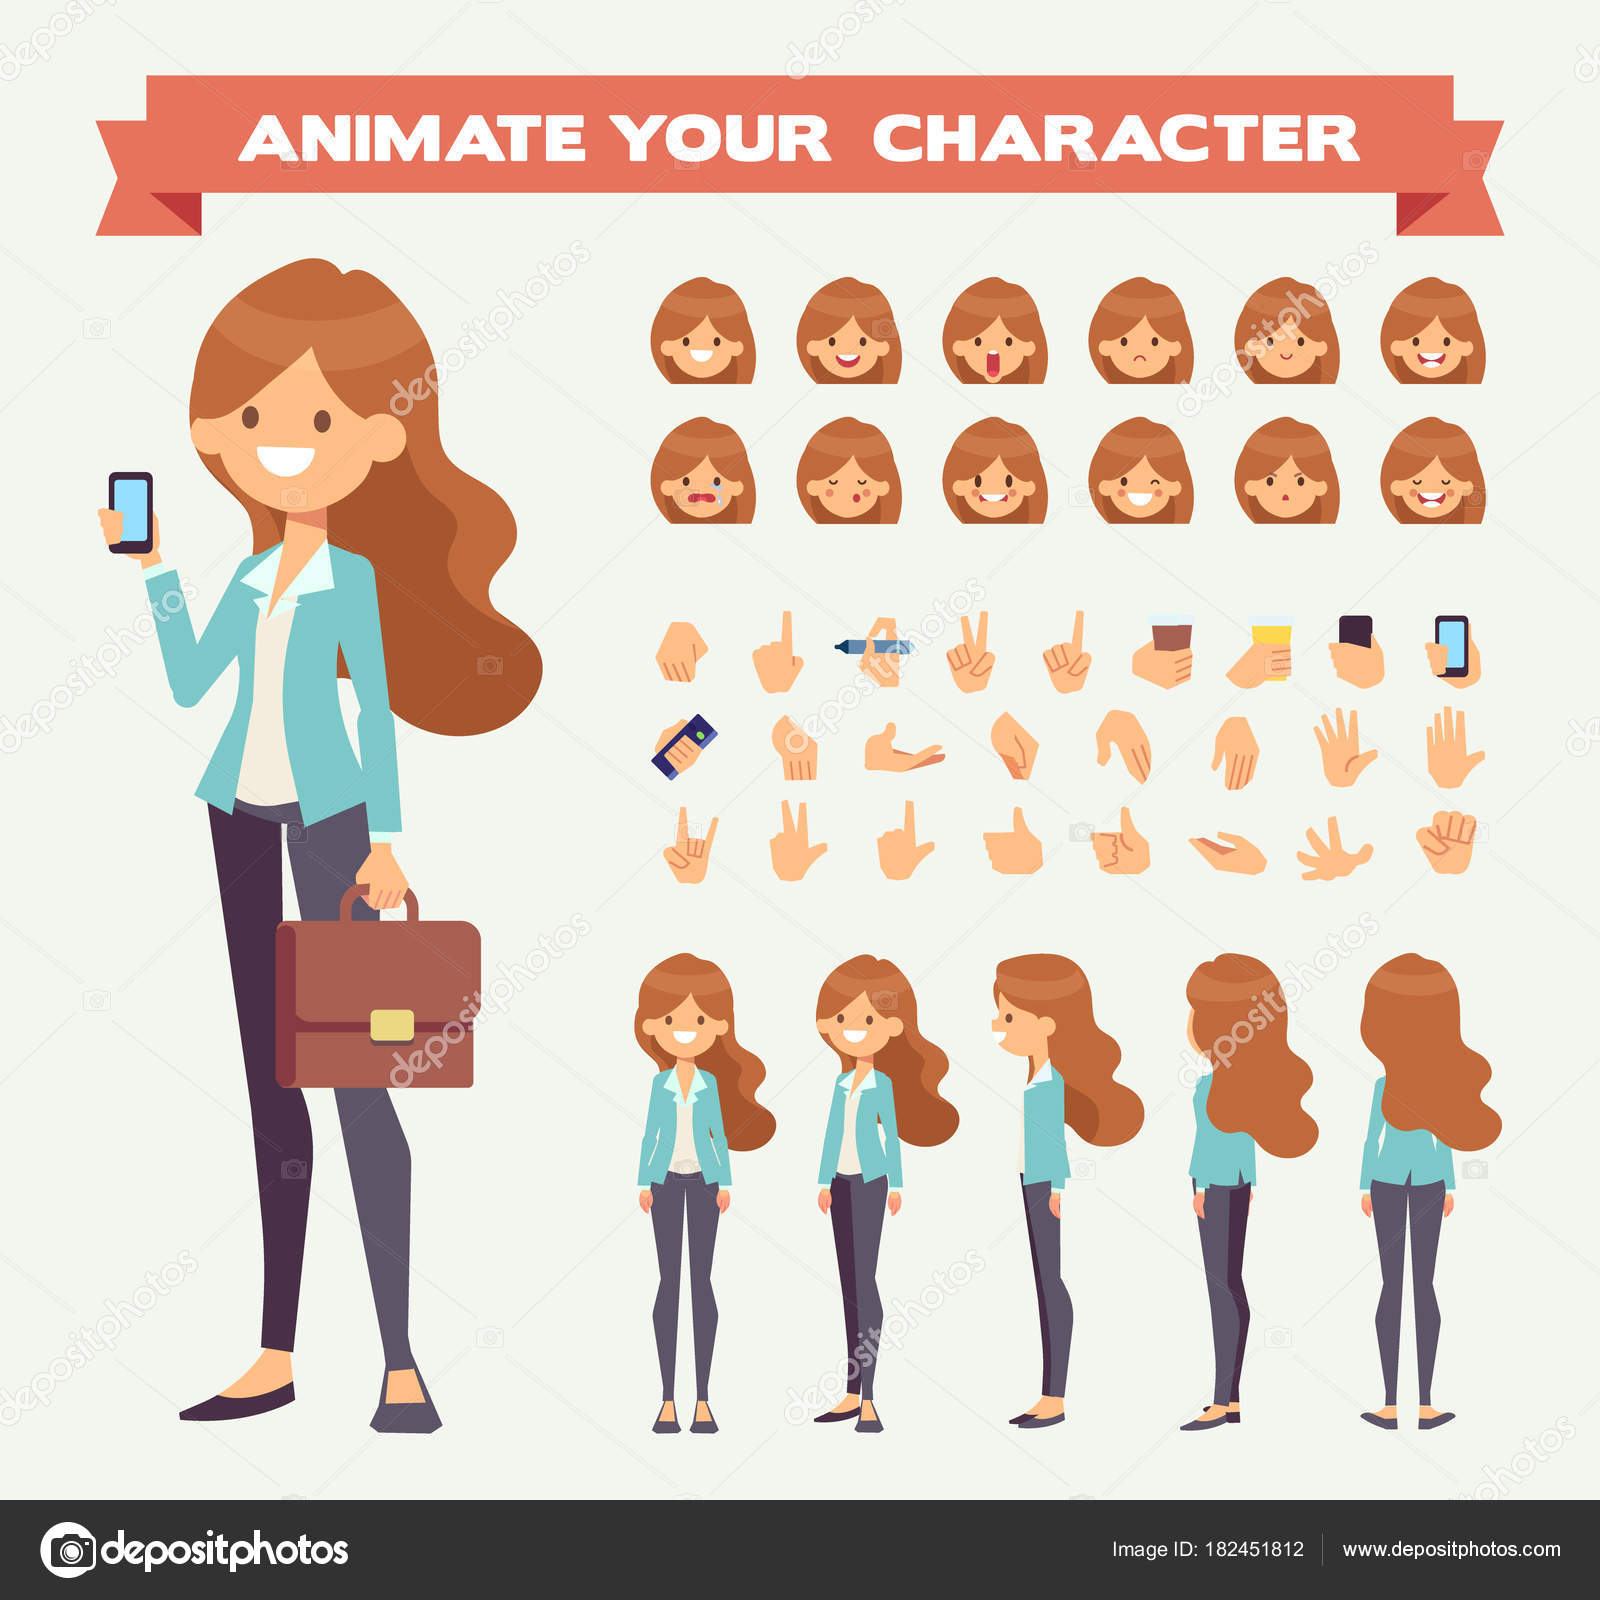 Animation characters Vector Art Stock Images | Depositphotos